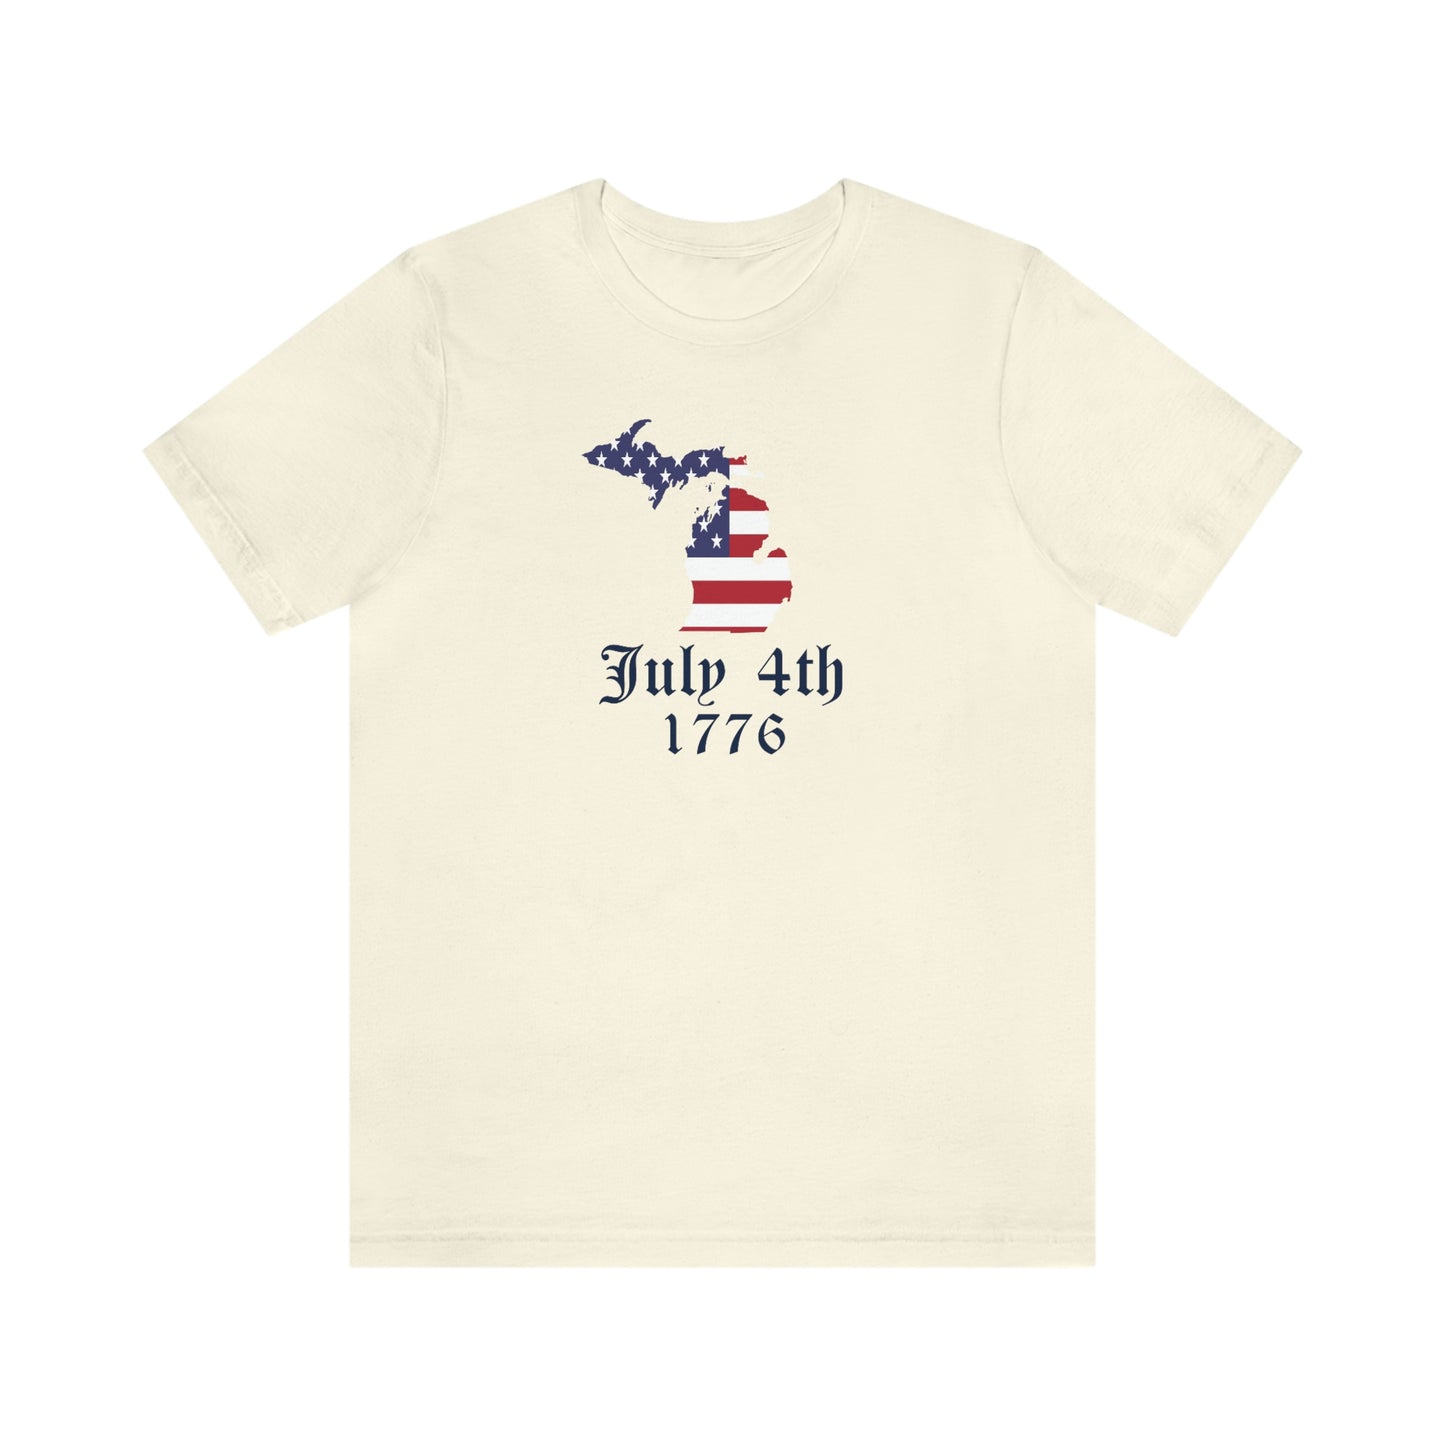 Michigan 'July 4th 1776' T-Shirt (Old English Font w/ MI USA Outline) | Unisex Standard Fit